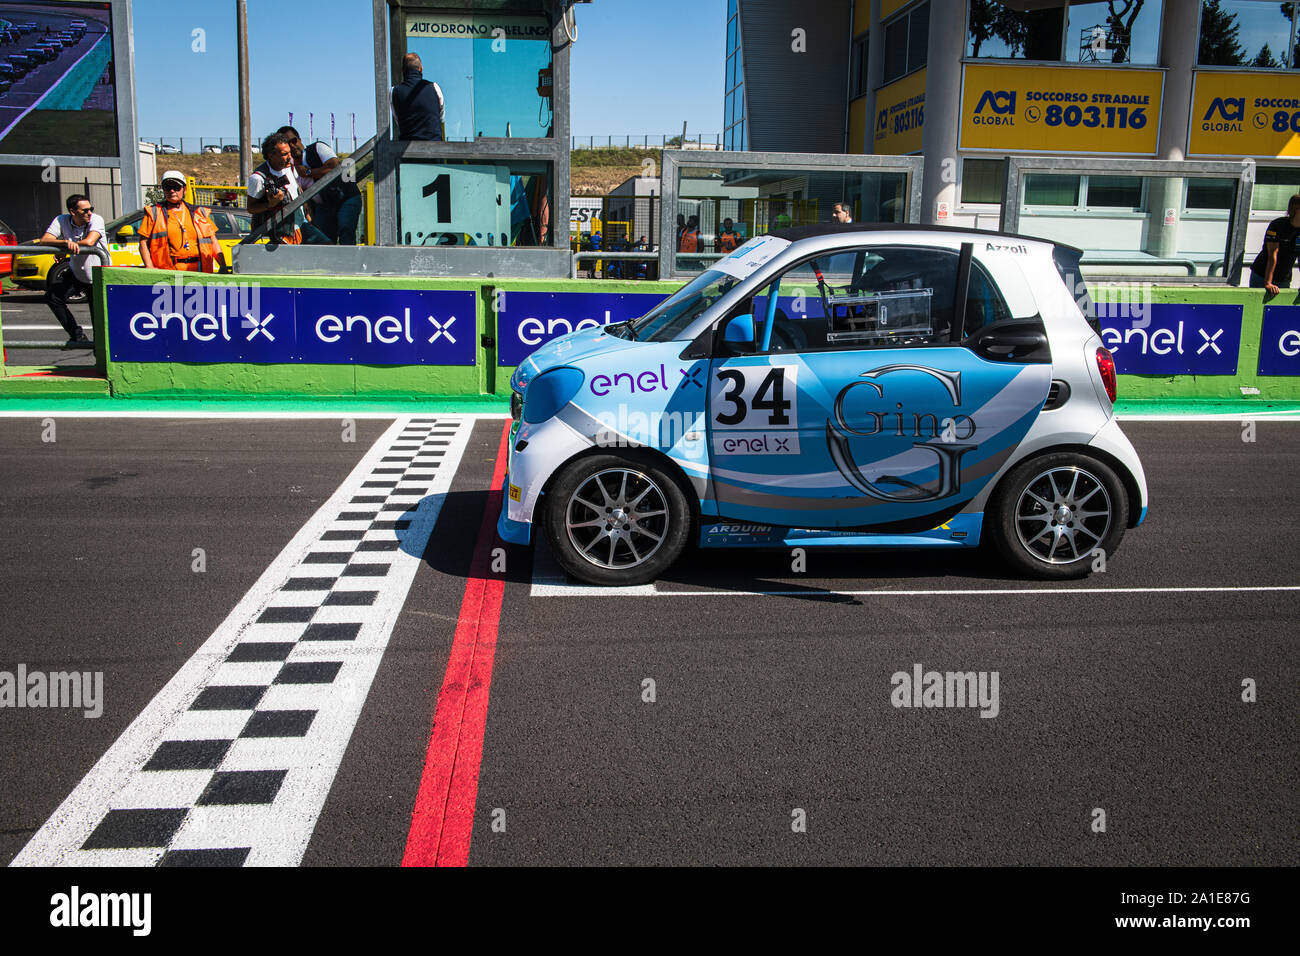 Vallelunga, Italy september 14 2019. Side view of racing Smart fortwo electric engine car in first position on grid asphalt track circuit Stock Photo